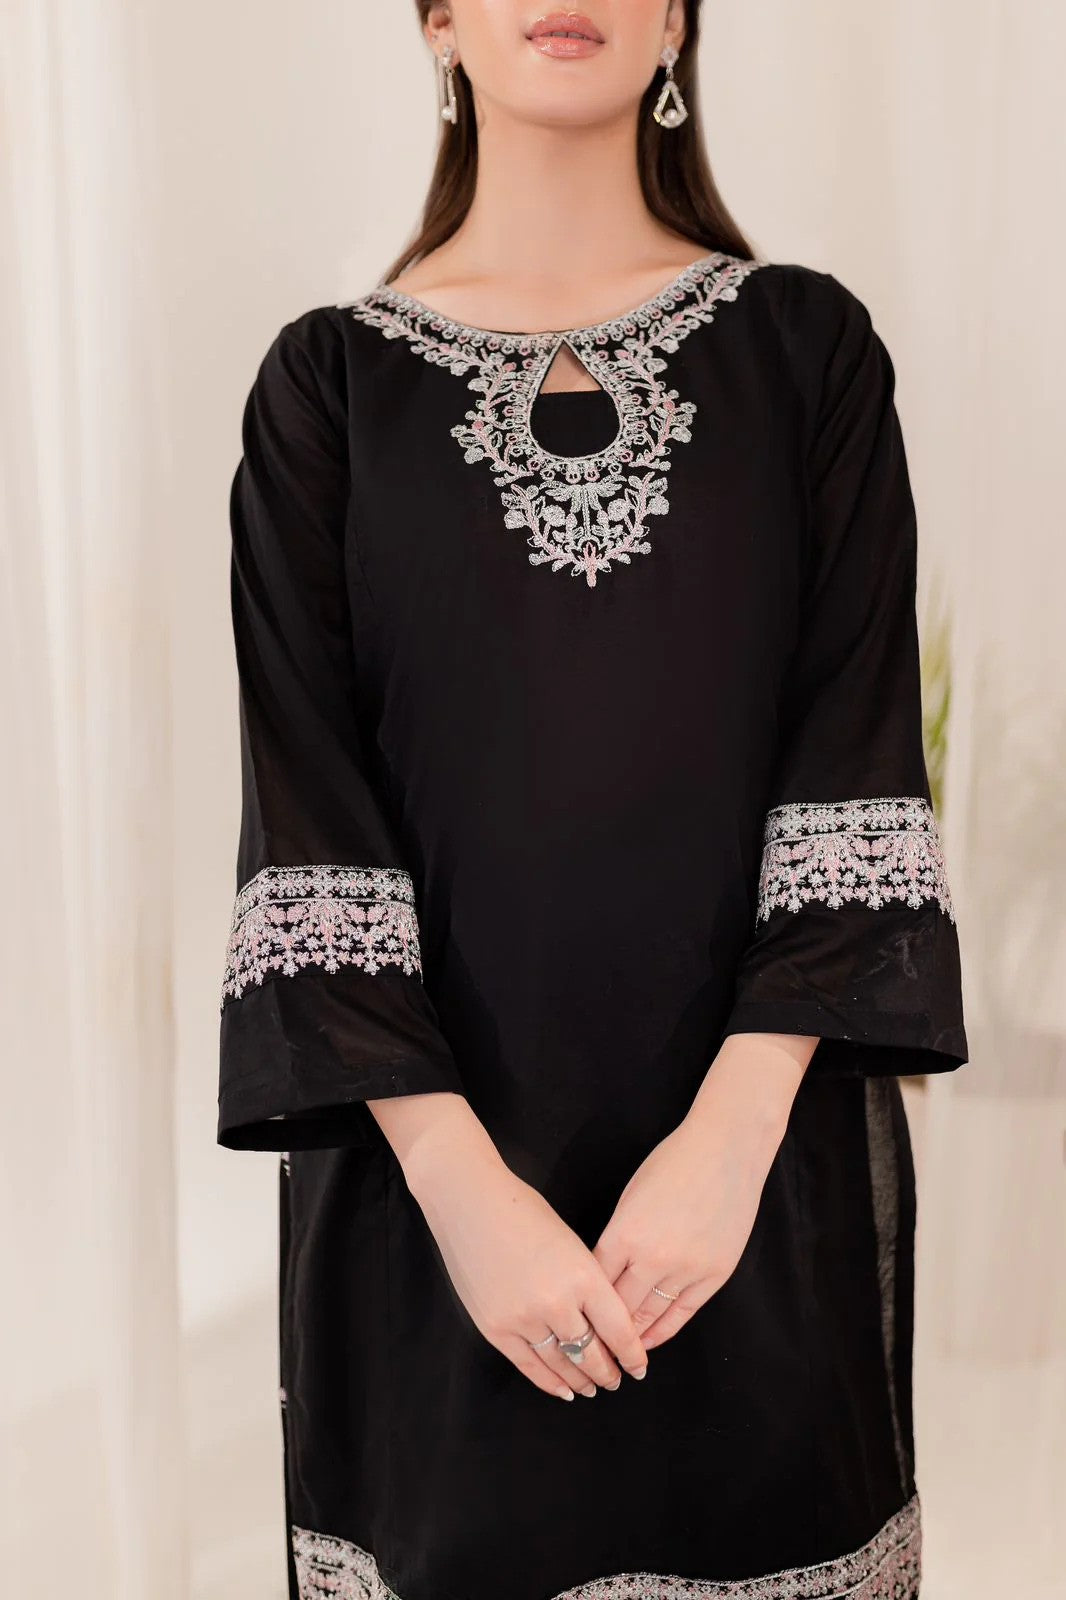 2 Piece Winters Embroidered Dress - Black